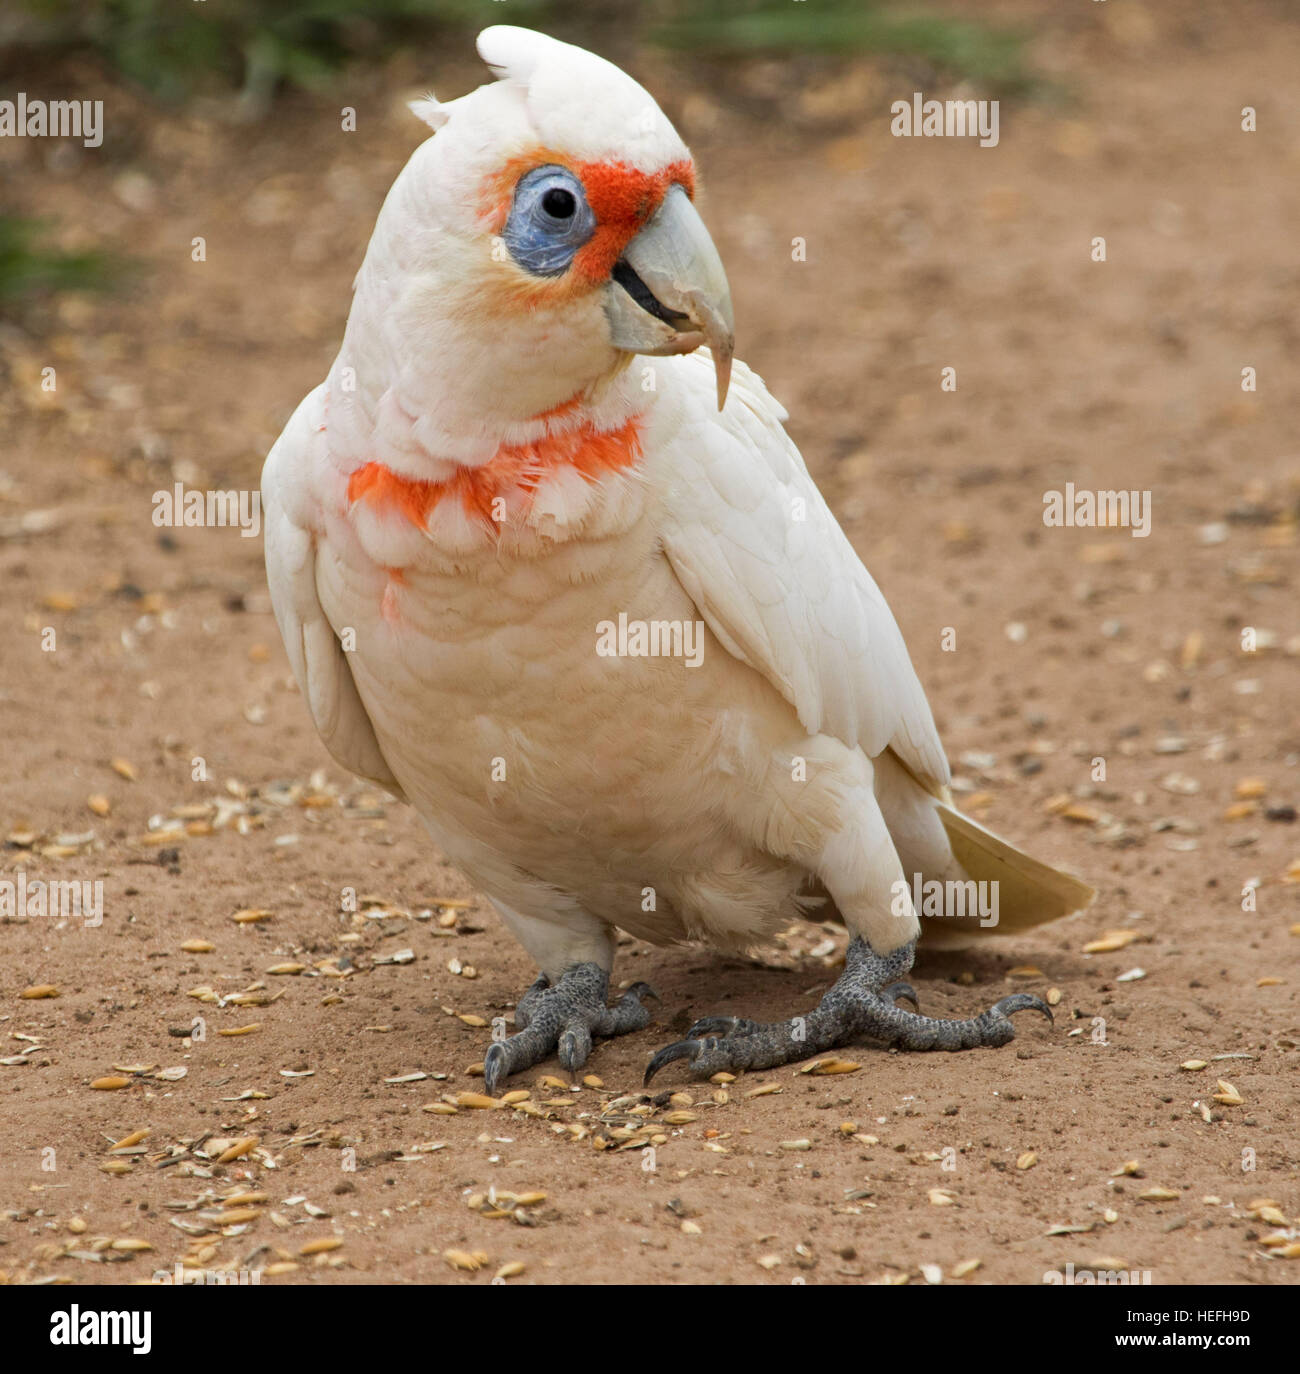 Australian long-billed corella, Cacatua tenuirostris beautiful & unusual cockatoo with splashes of red on white plumage, in the wild in city park Stock Photo